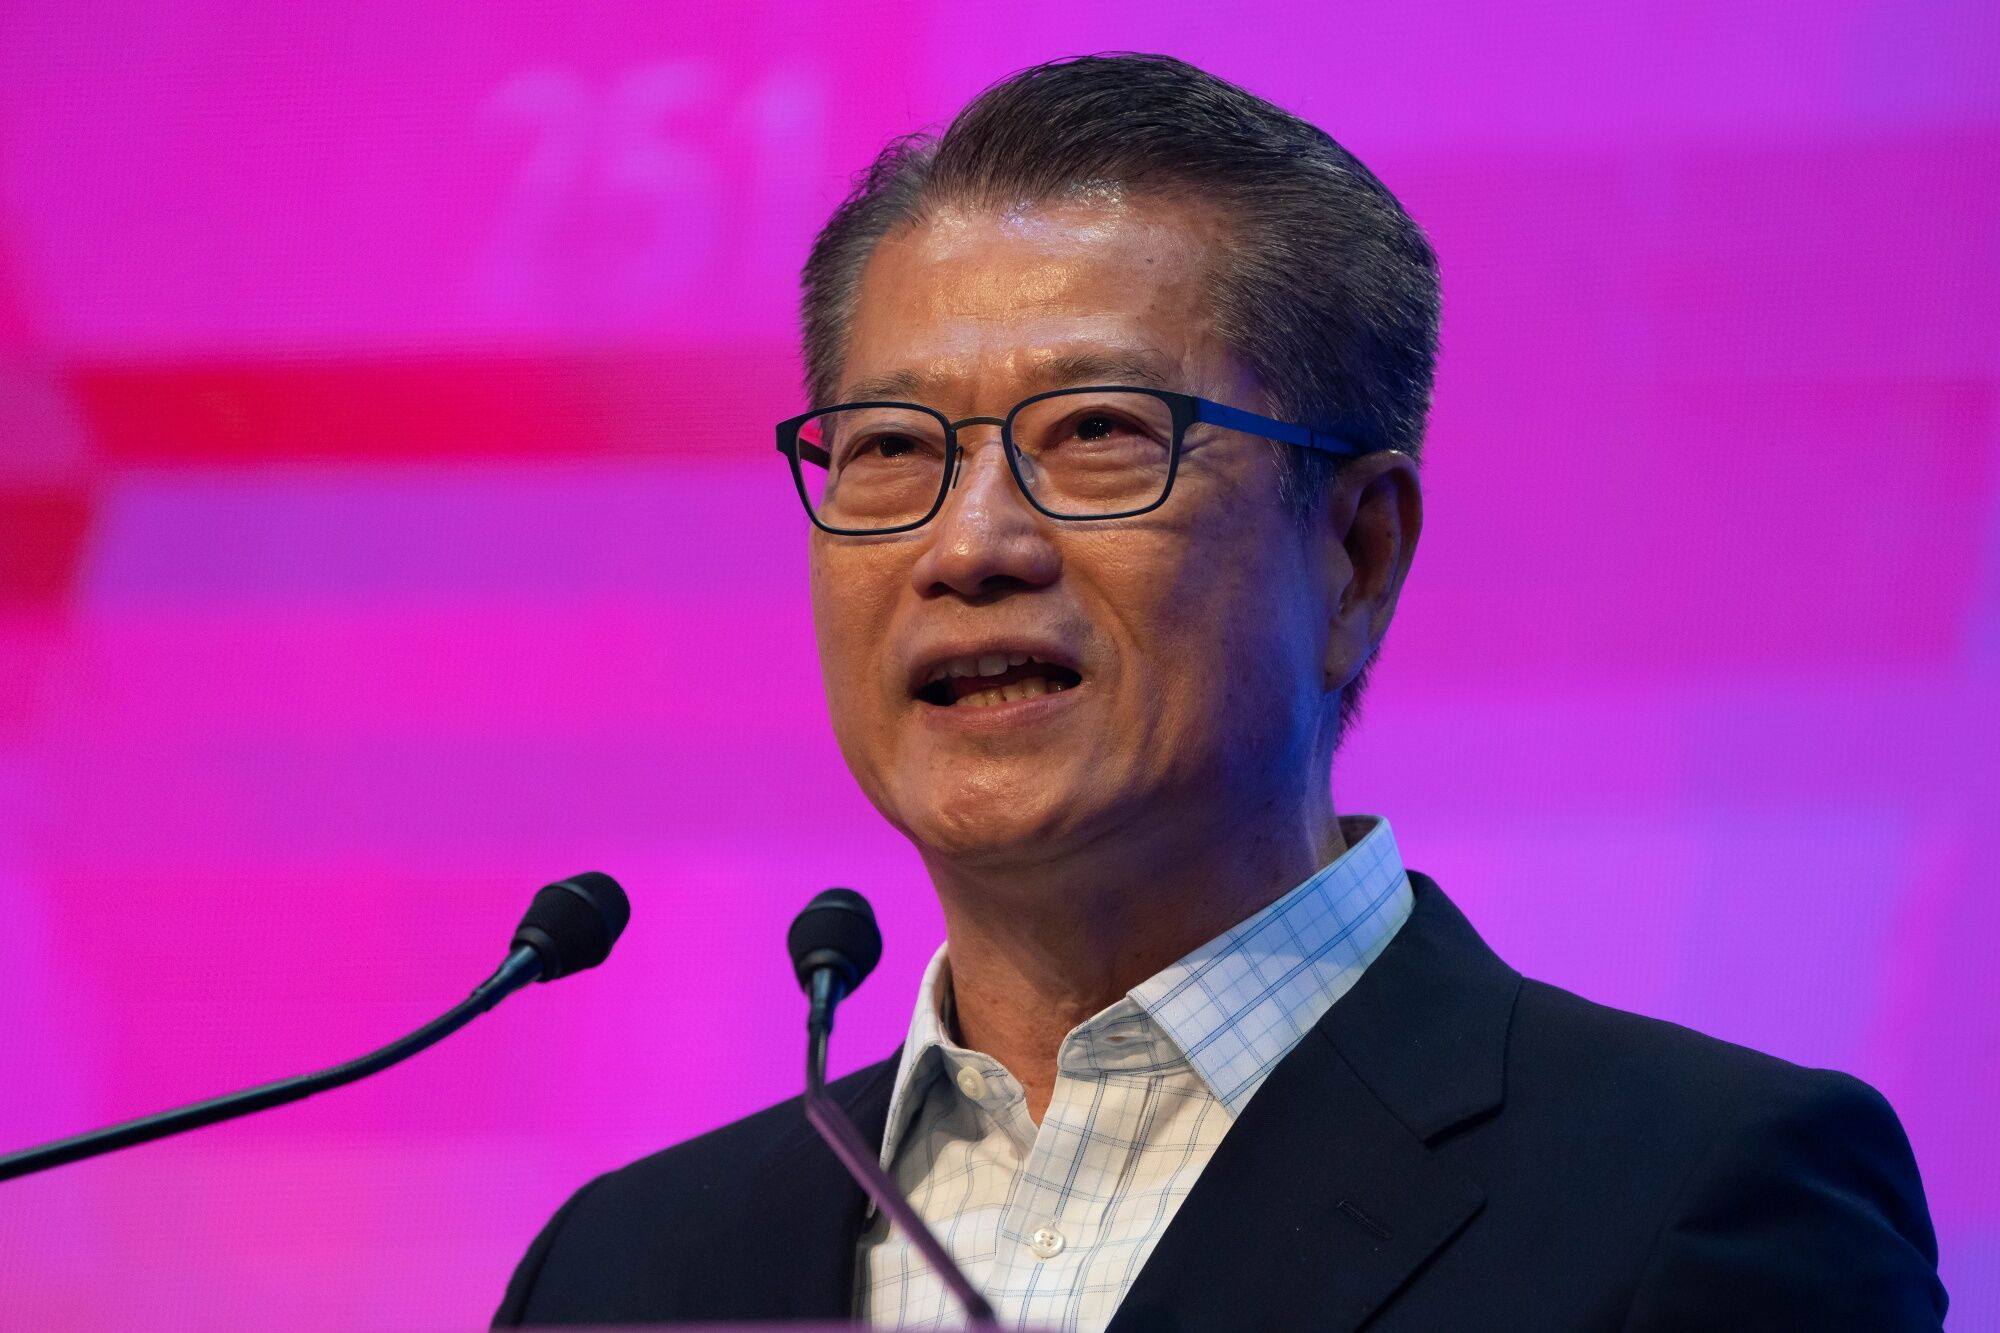 Paul Chan, Hong Kong’s financial secretary, speaks during the Web3 Blockchain Festival in Hong Kong, China, on Wednesday, April 12, 2023. The conference runs through April 15. Photographer: Anthony Kwan/Bloomberg